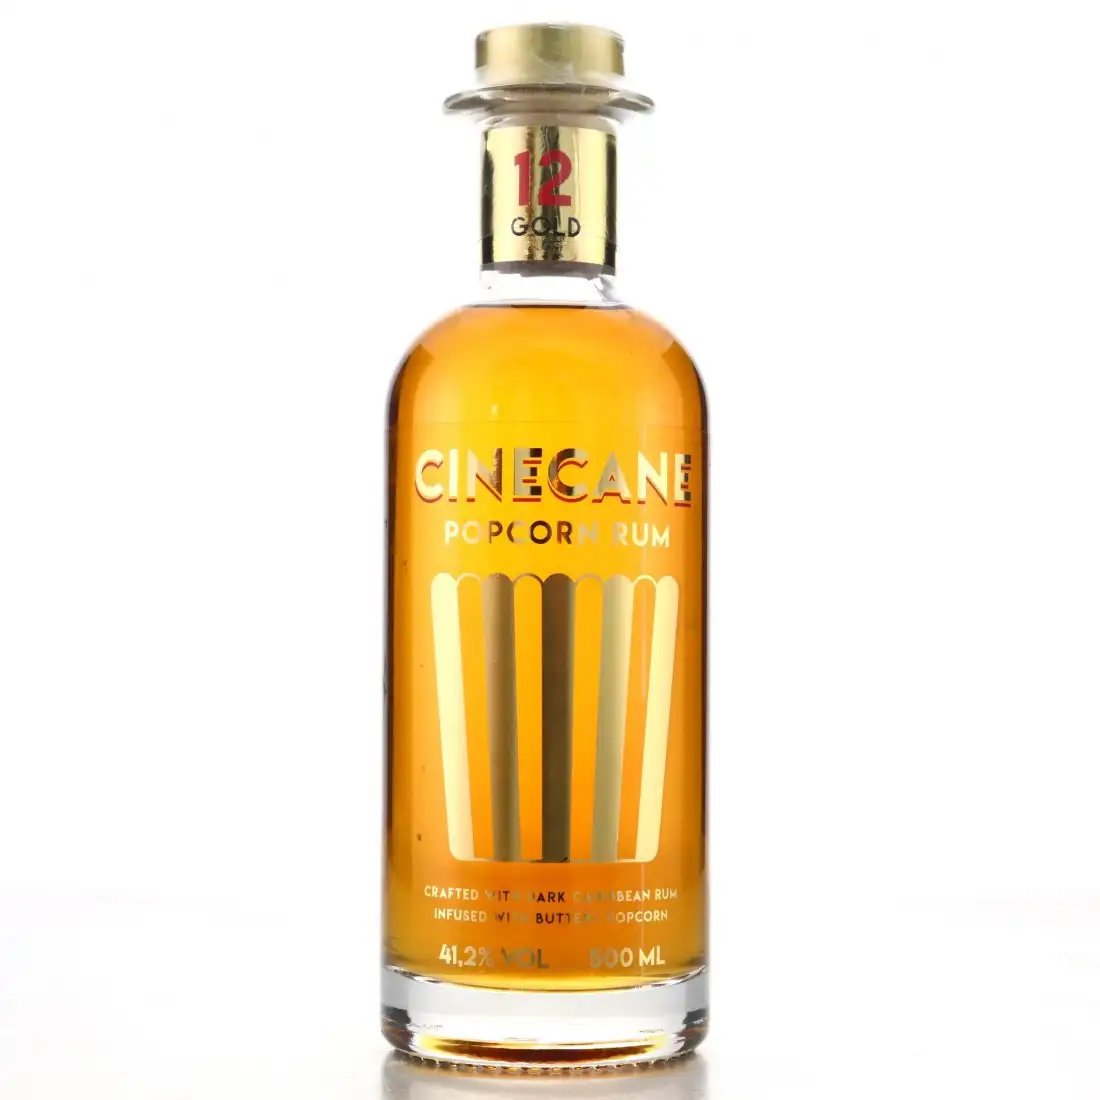 Image of the front of the bottle of the rum CINECANE Popcorn Rum Gold